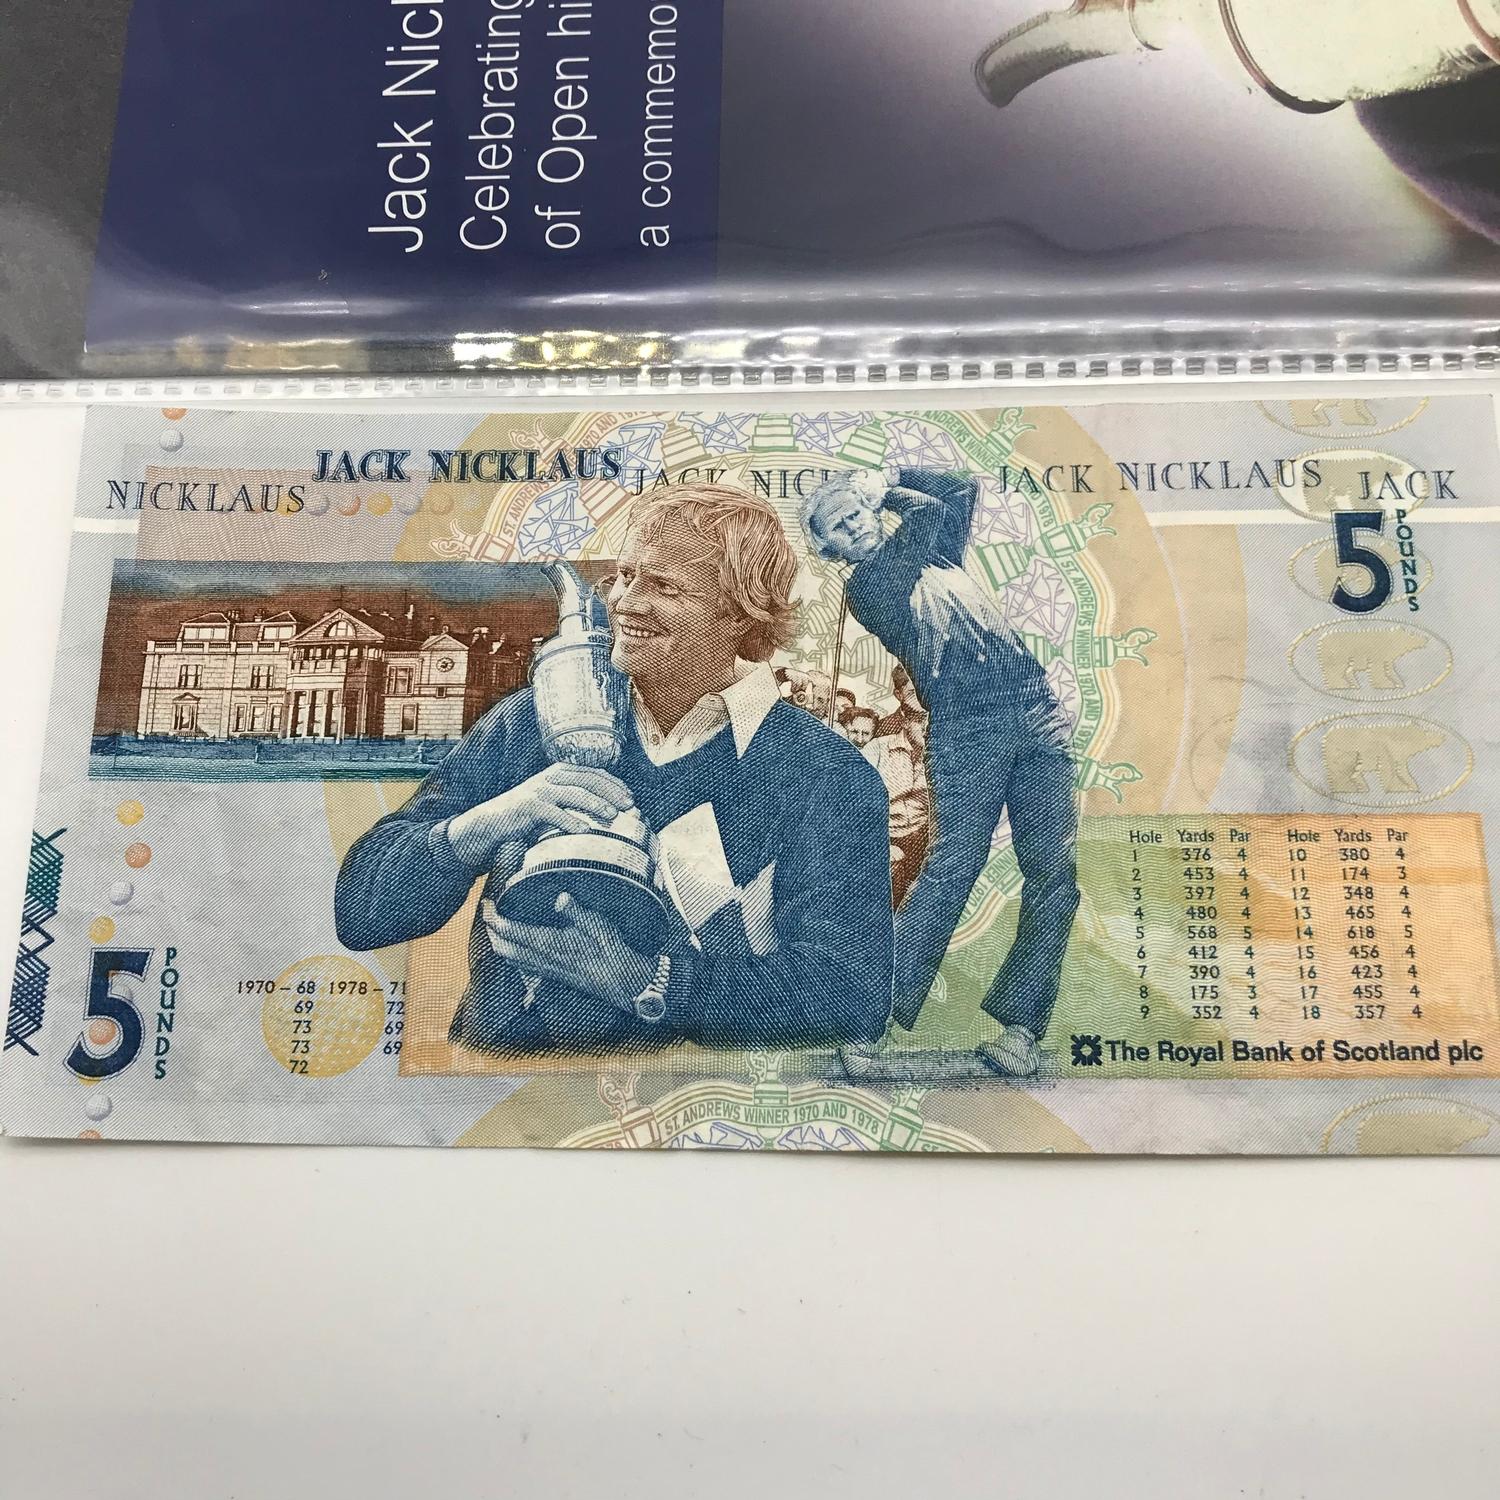 A Lot of three Jack Nicklaus £5 bank notes together with three Old Tom Morris £5 bank notes. - Image 4 of 5